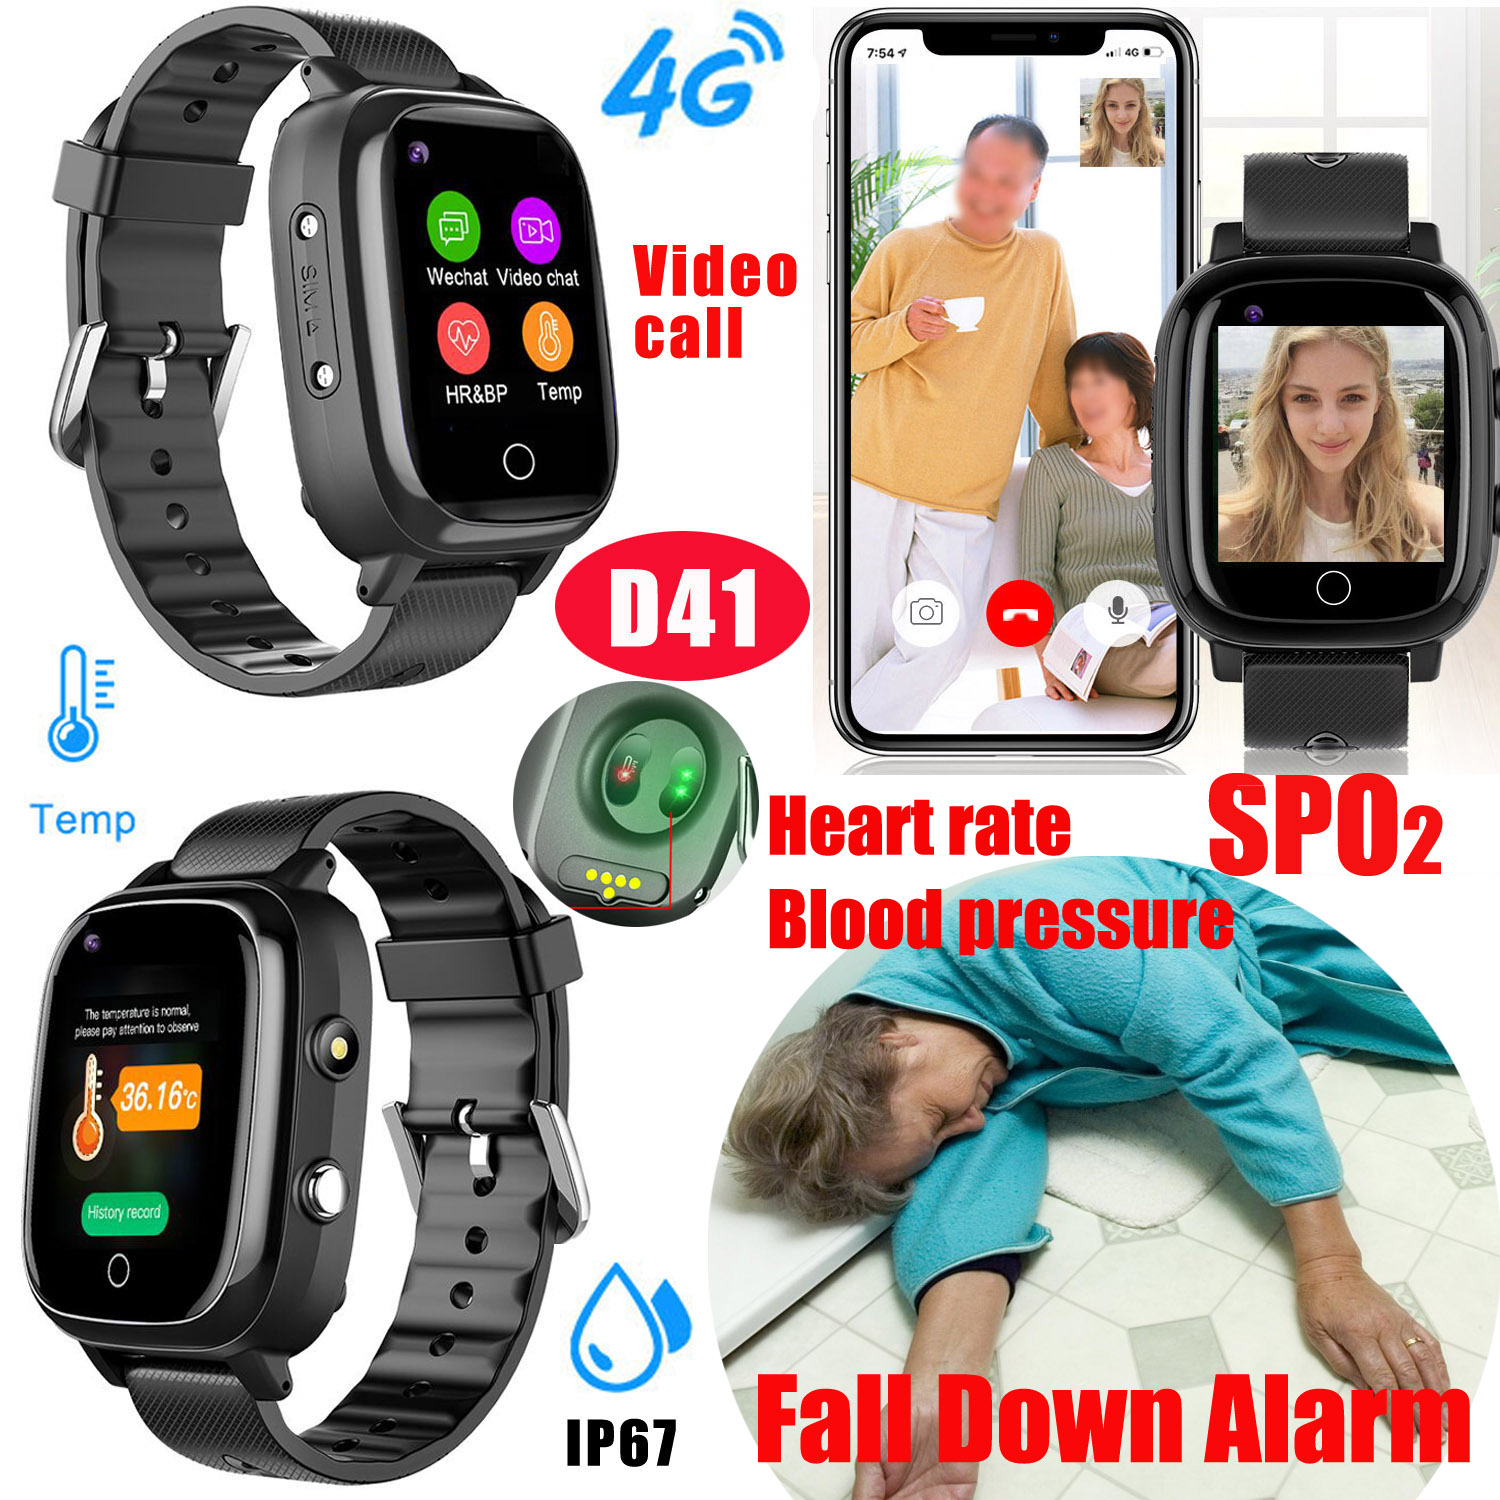 LTE Video call IP67 Waterproof Thermometer Smart Watch GPS Tracker D41